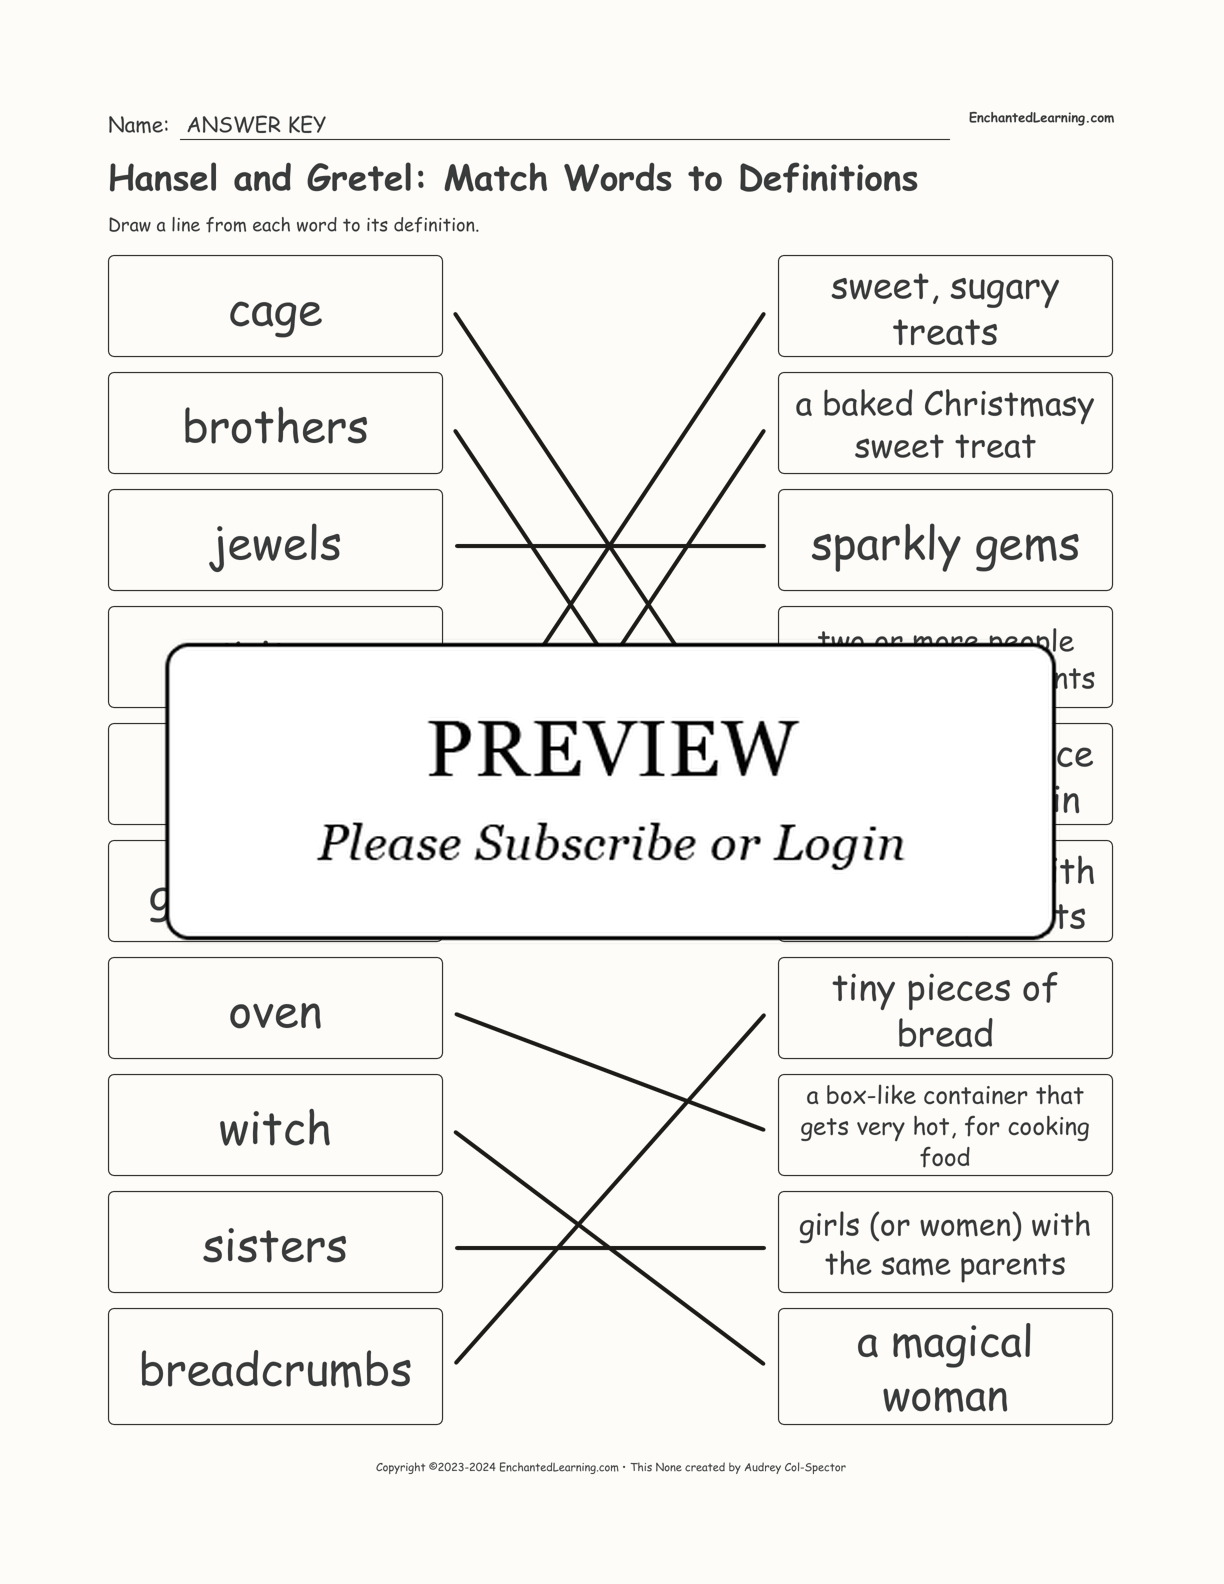 Hansel and Gretel: Match Words to Definitions interactive worksheet page 2